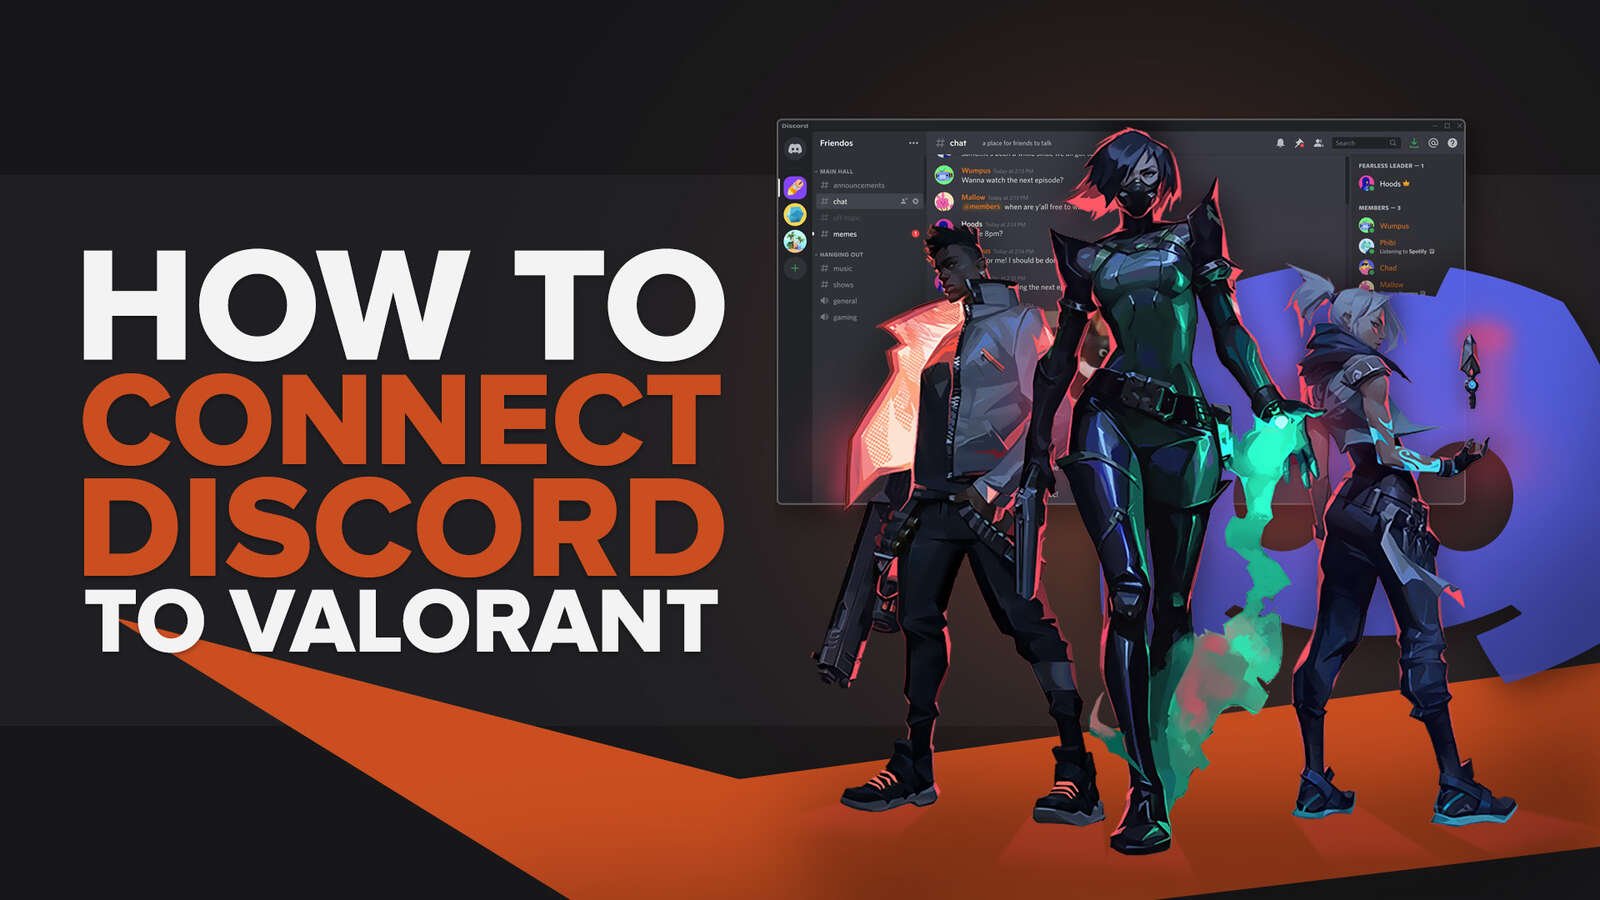 How to Connect Valorant to Discord